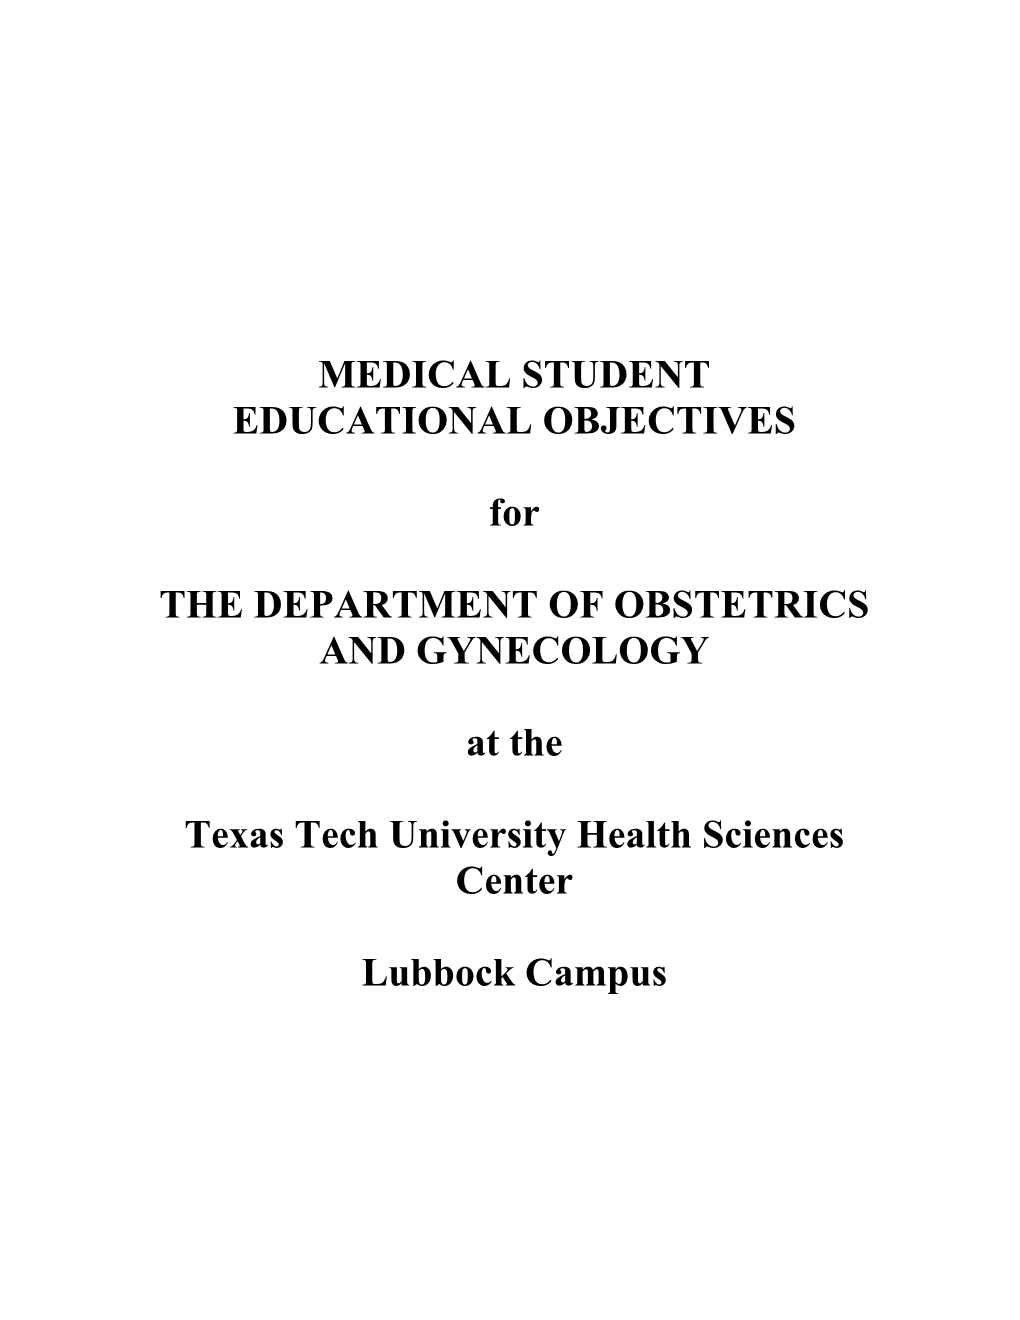 MEDICAL STUDENT EDUCATIONAL OBJECTIVES for THE